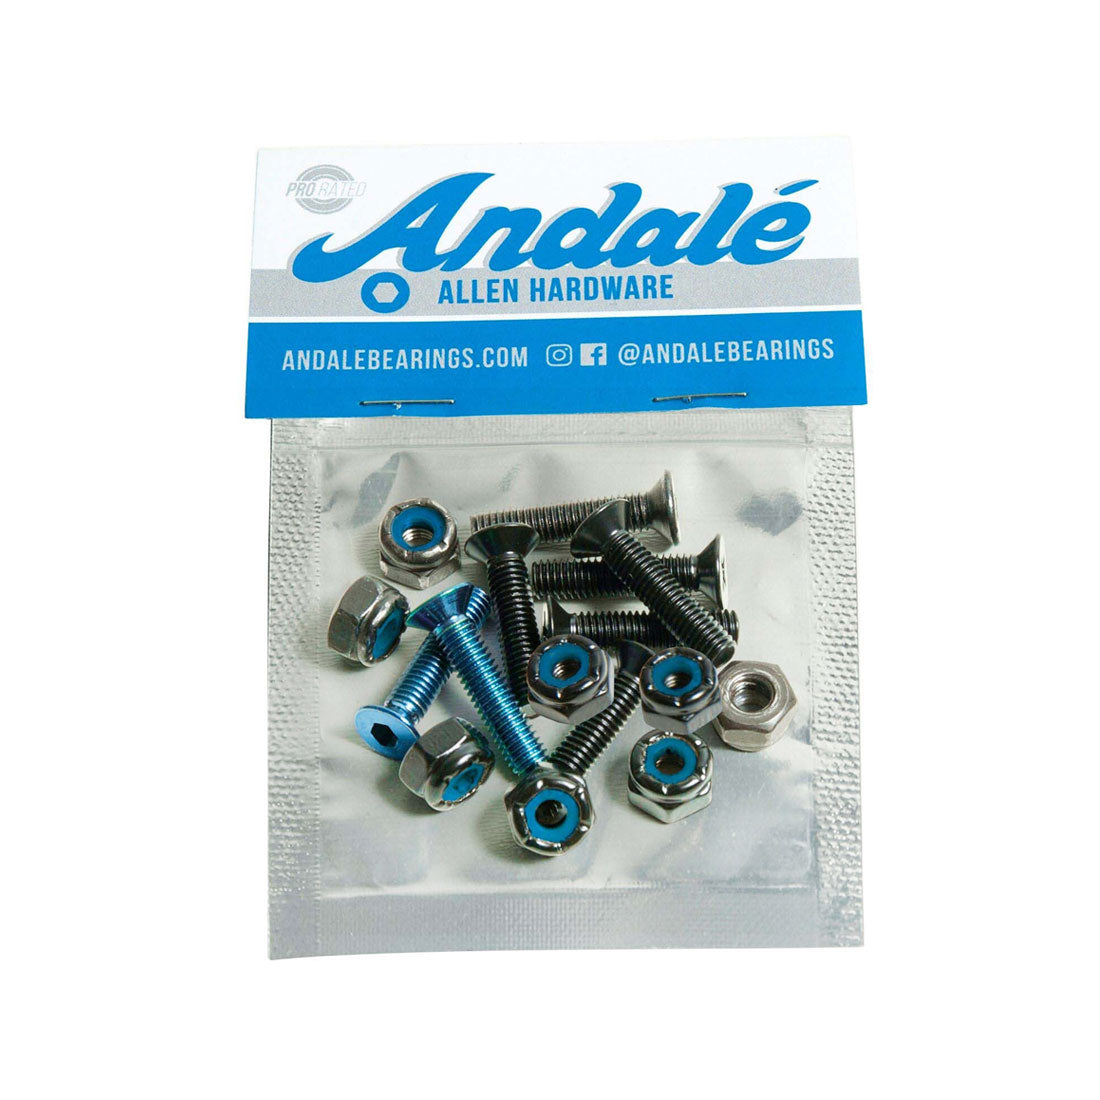 Andale 7/8in Allen Hardware 8pk - Blue Skateboard Hardware and Parts